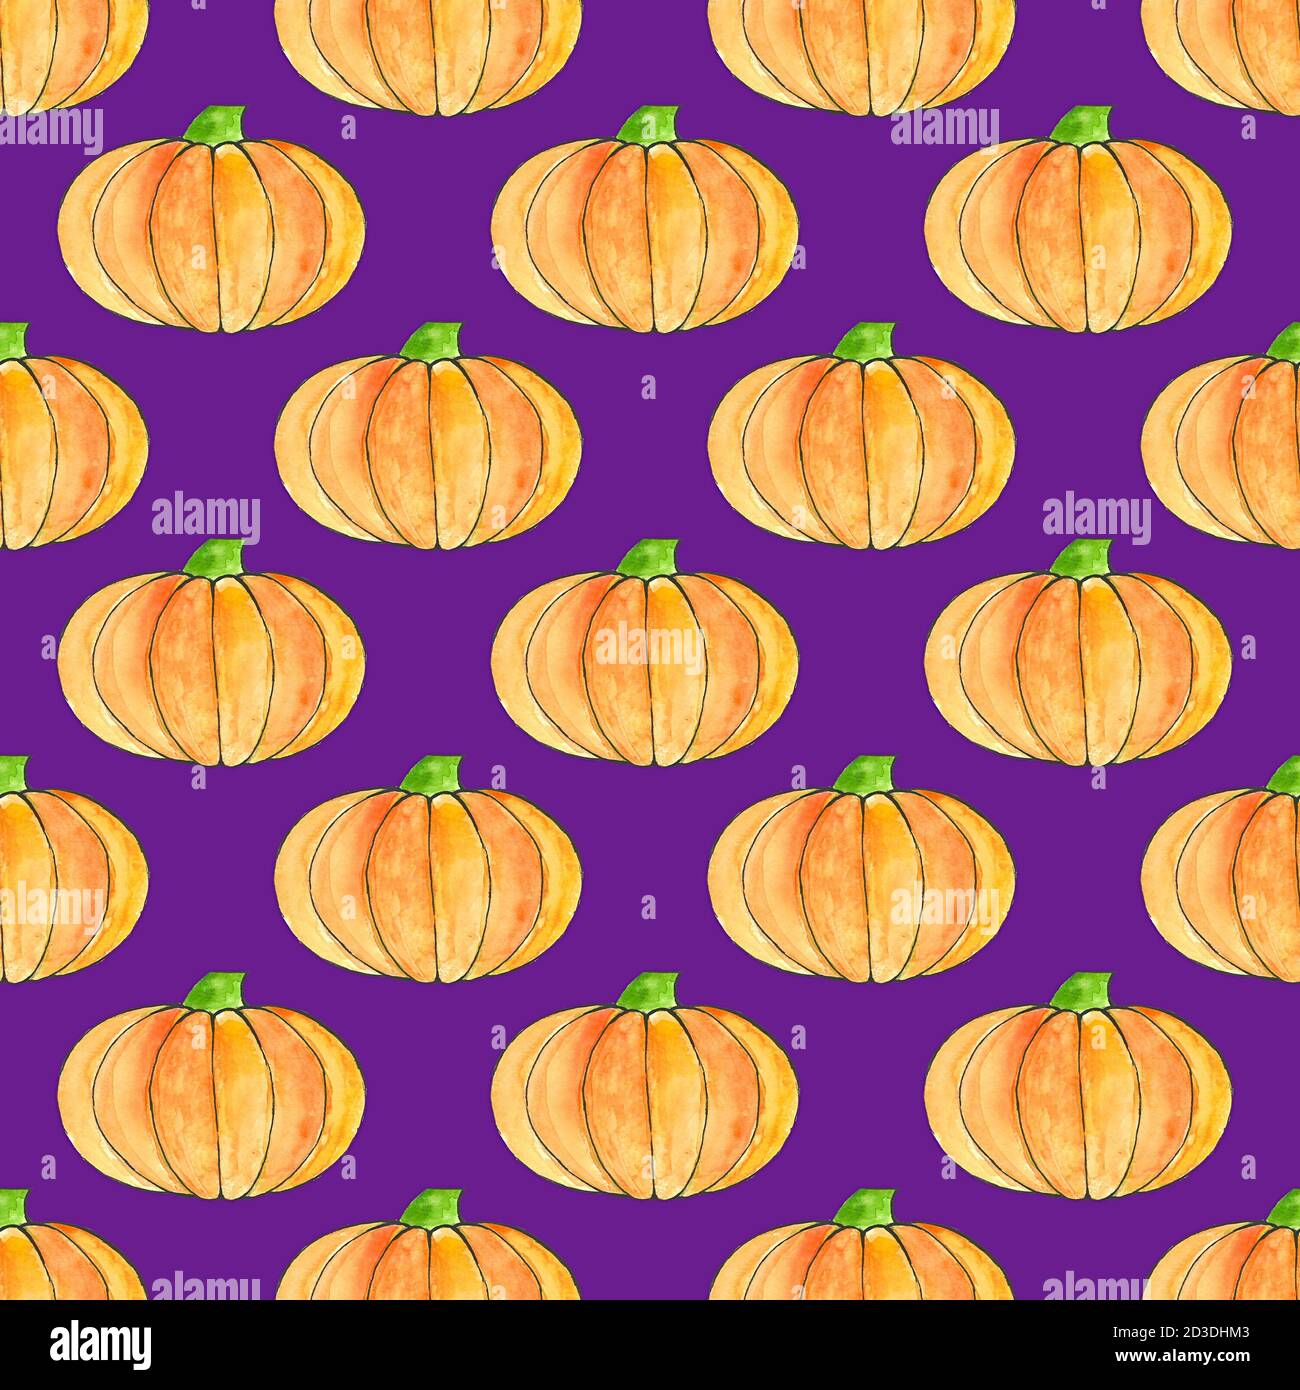 Cute hand drawn pumpkin seamless pattern, hand drawn pumpkins - great as  Thanksgiving background, wallpaper, web page background, wrapping paper.  Hall Stock Photo - Alamy